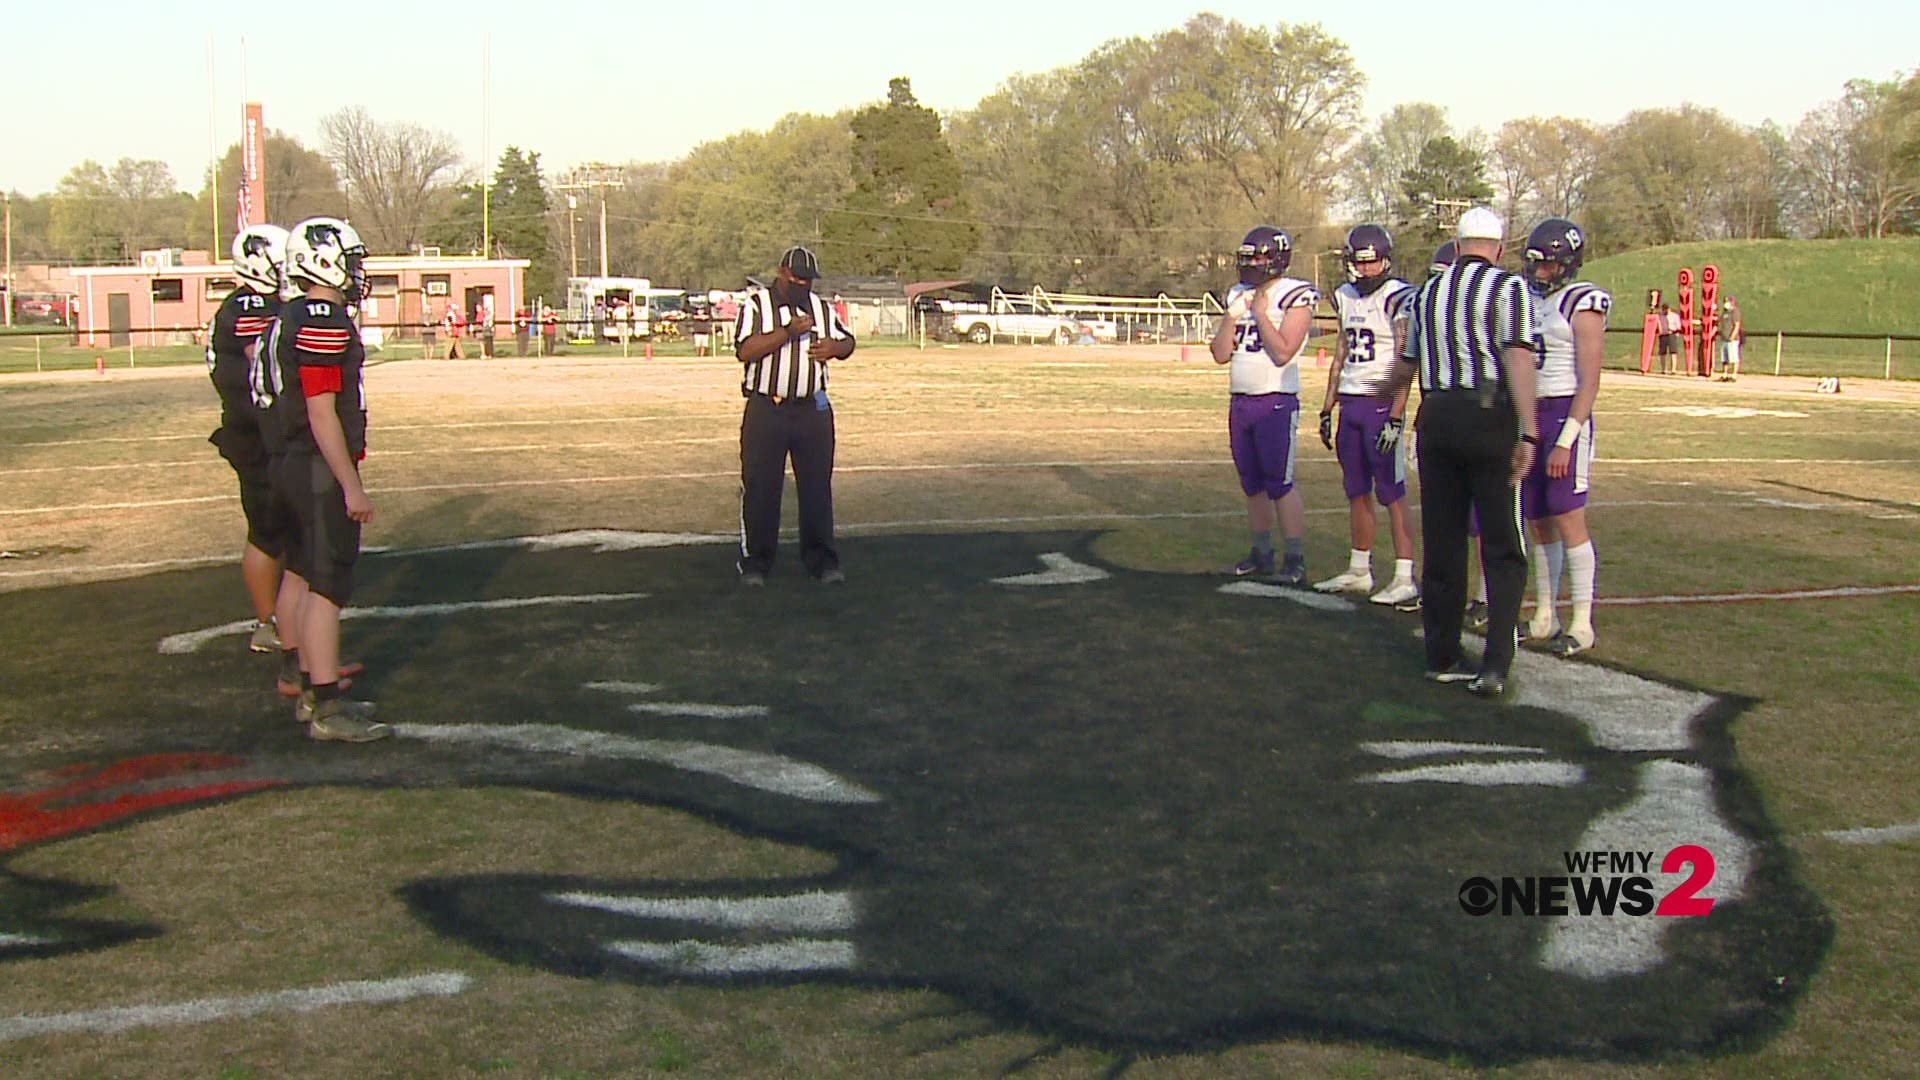 Northern Guilford won 49-7. The Nighthawks are 5-1 heading into Friday's regular season finale vs. Western Alamance